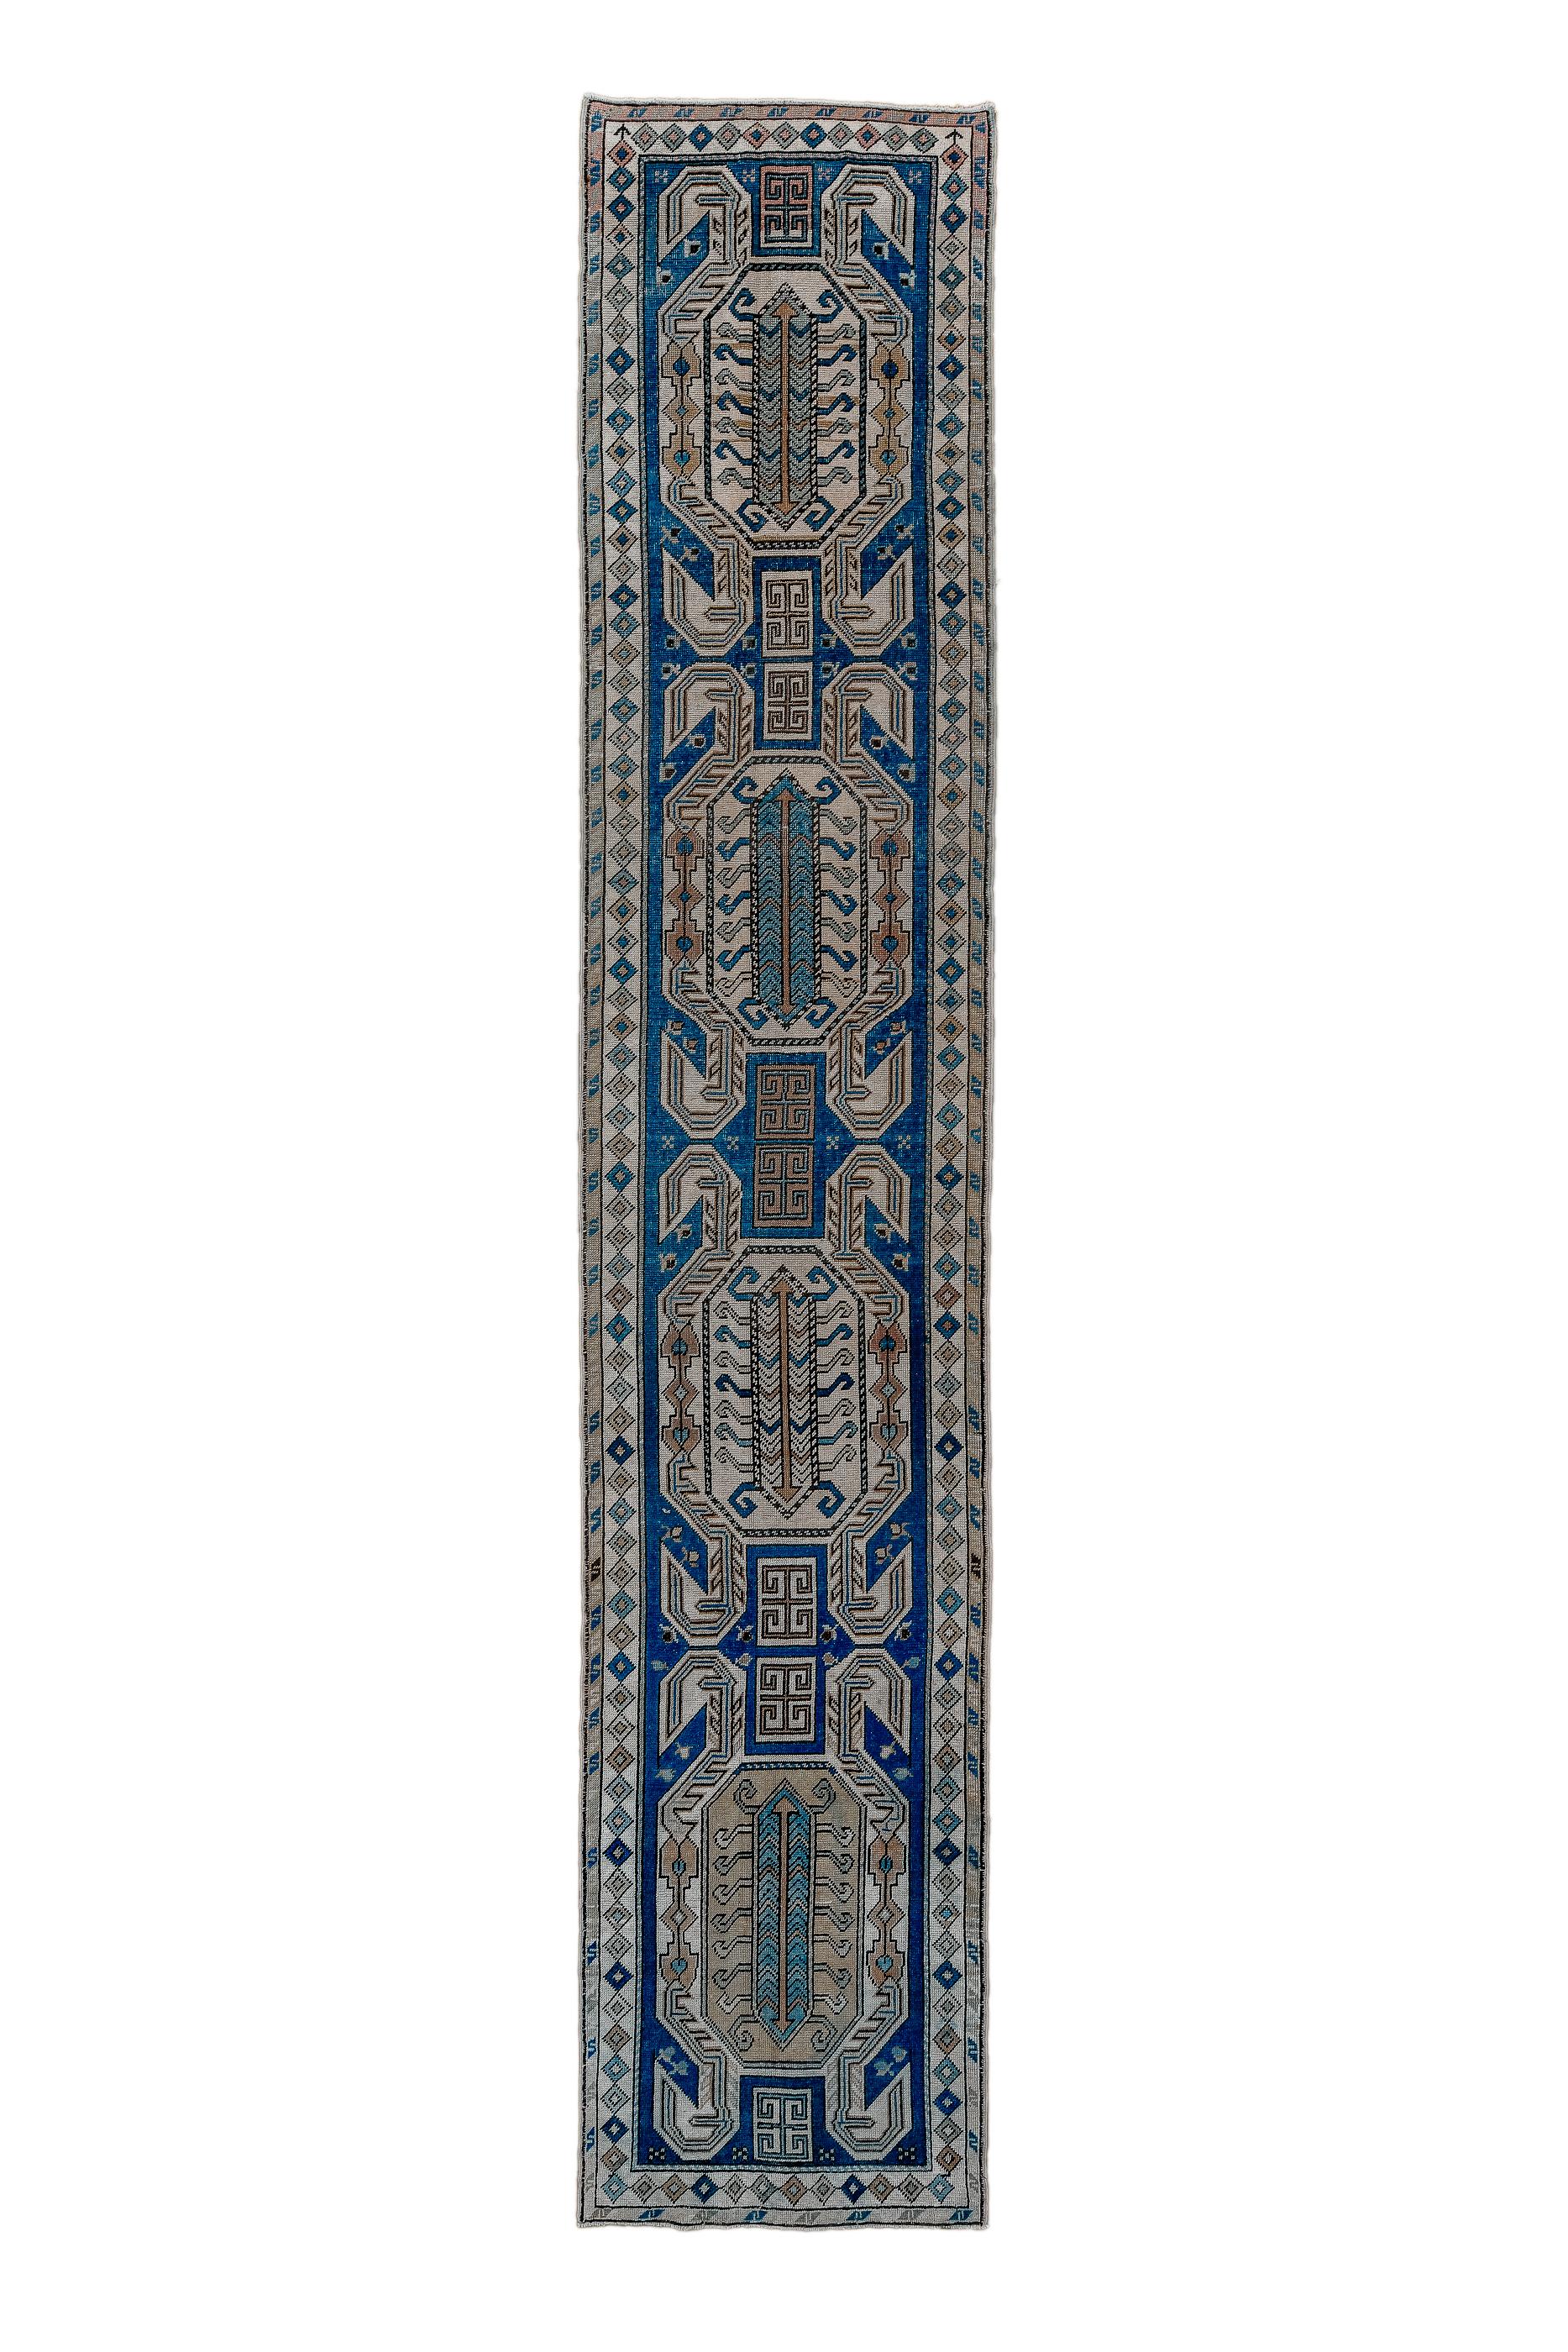 This usefully narrow kenare (runner) shows a pattern of four four hooked cartouches, all with centipede centres, on a royal blue ground. Panels of two double E’s connect the cartouches into a pole. Ecru main border of chains of small, nested